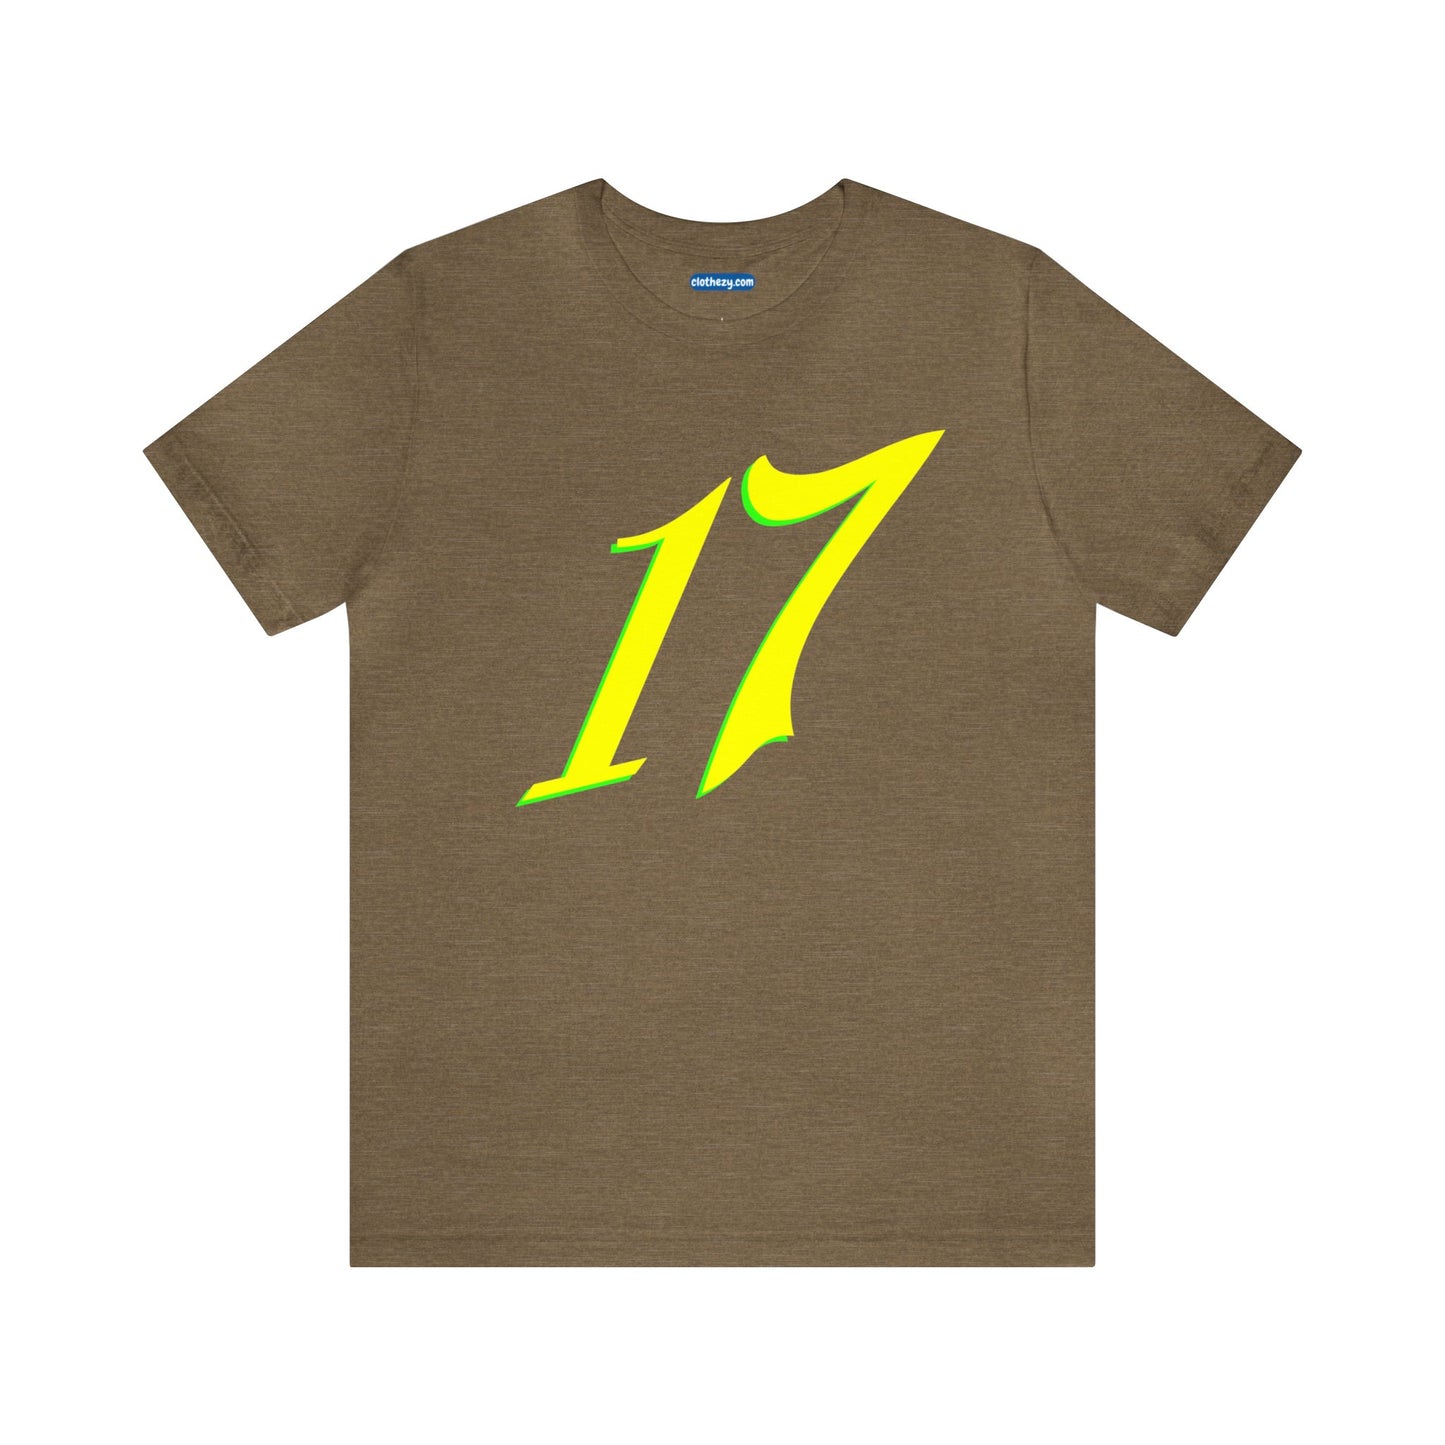 Number 17 Design - Soft Cotton Tee for birthdays and celebrations, Gift for friends and family, Multiple Options by clothezy.com in Olive Heather Size Small - Buy Now